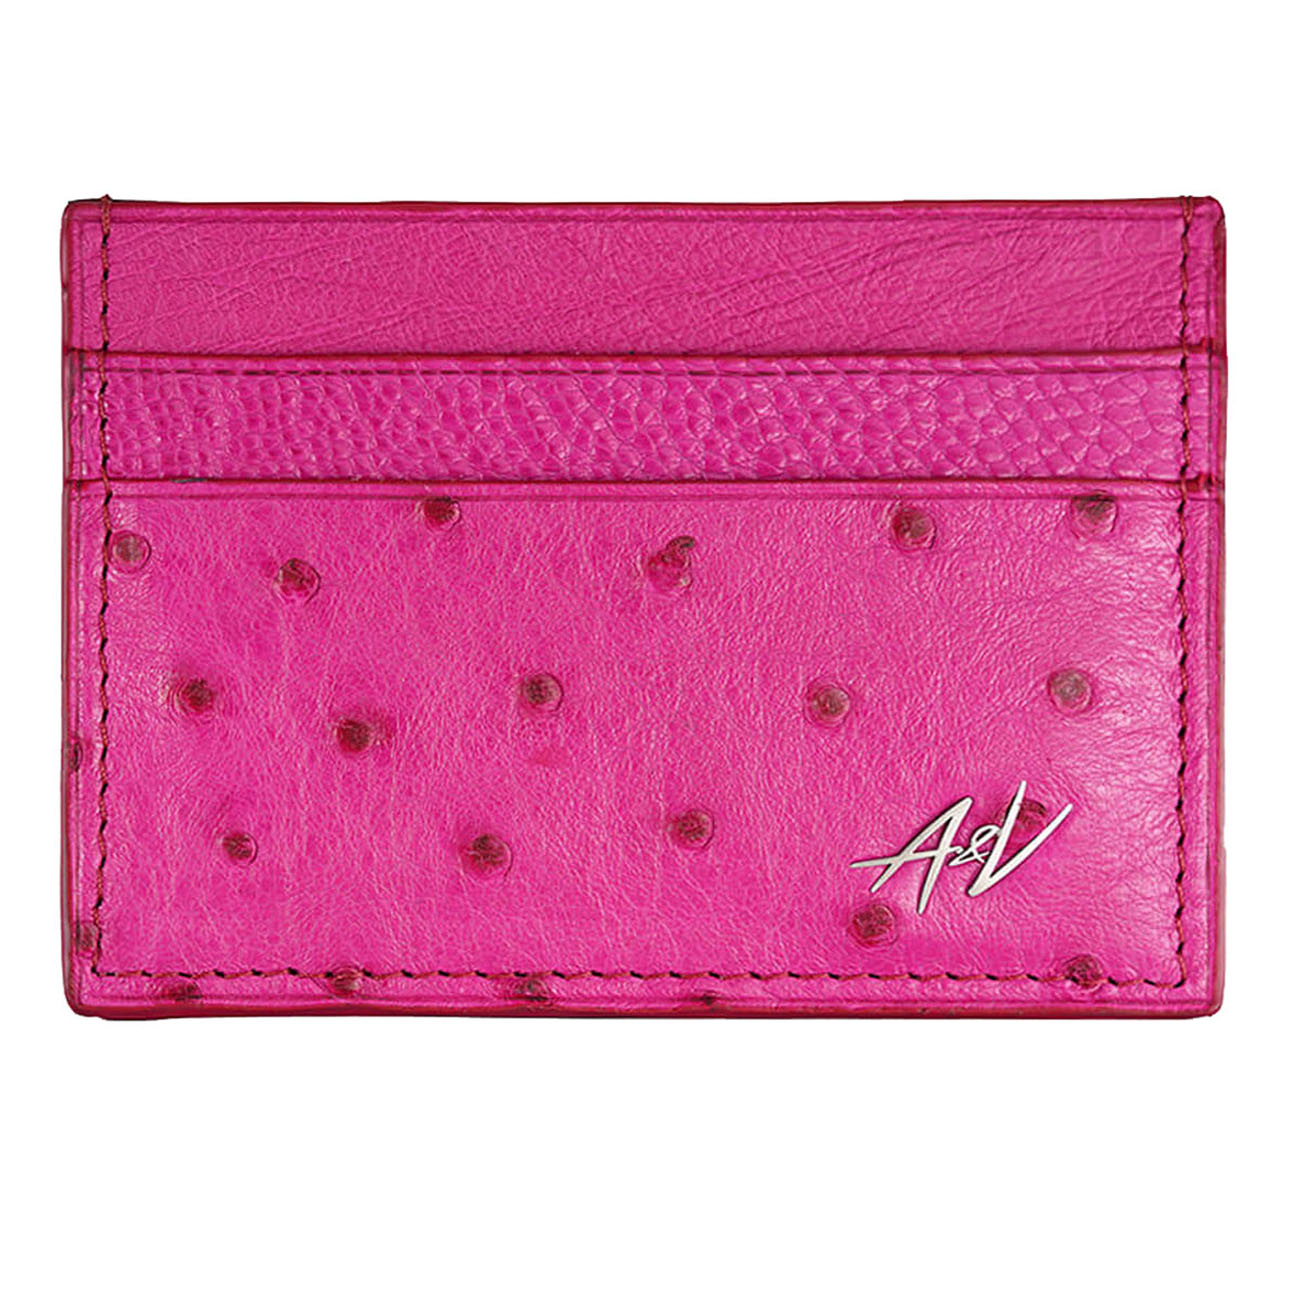 CARD HOLDER OSTRICH LEATHER PINK LADIES